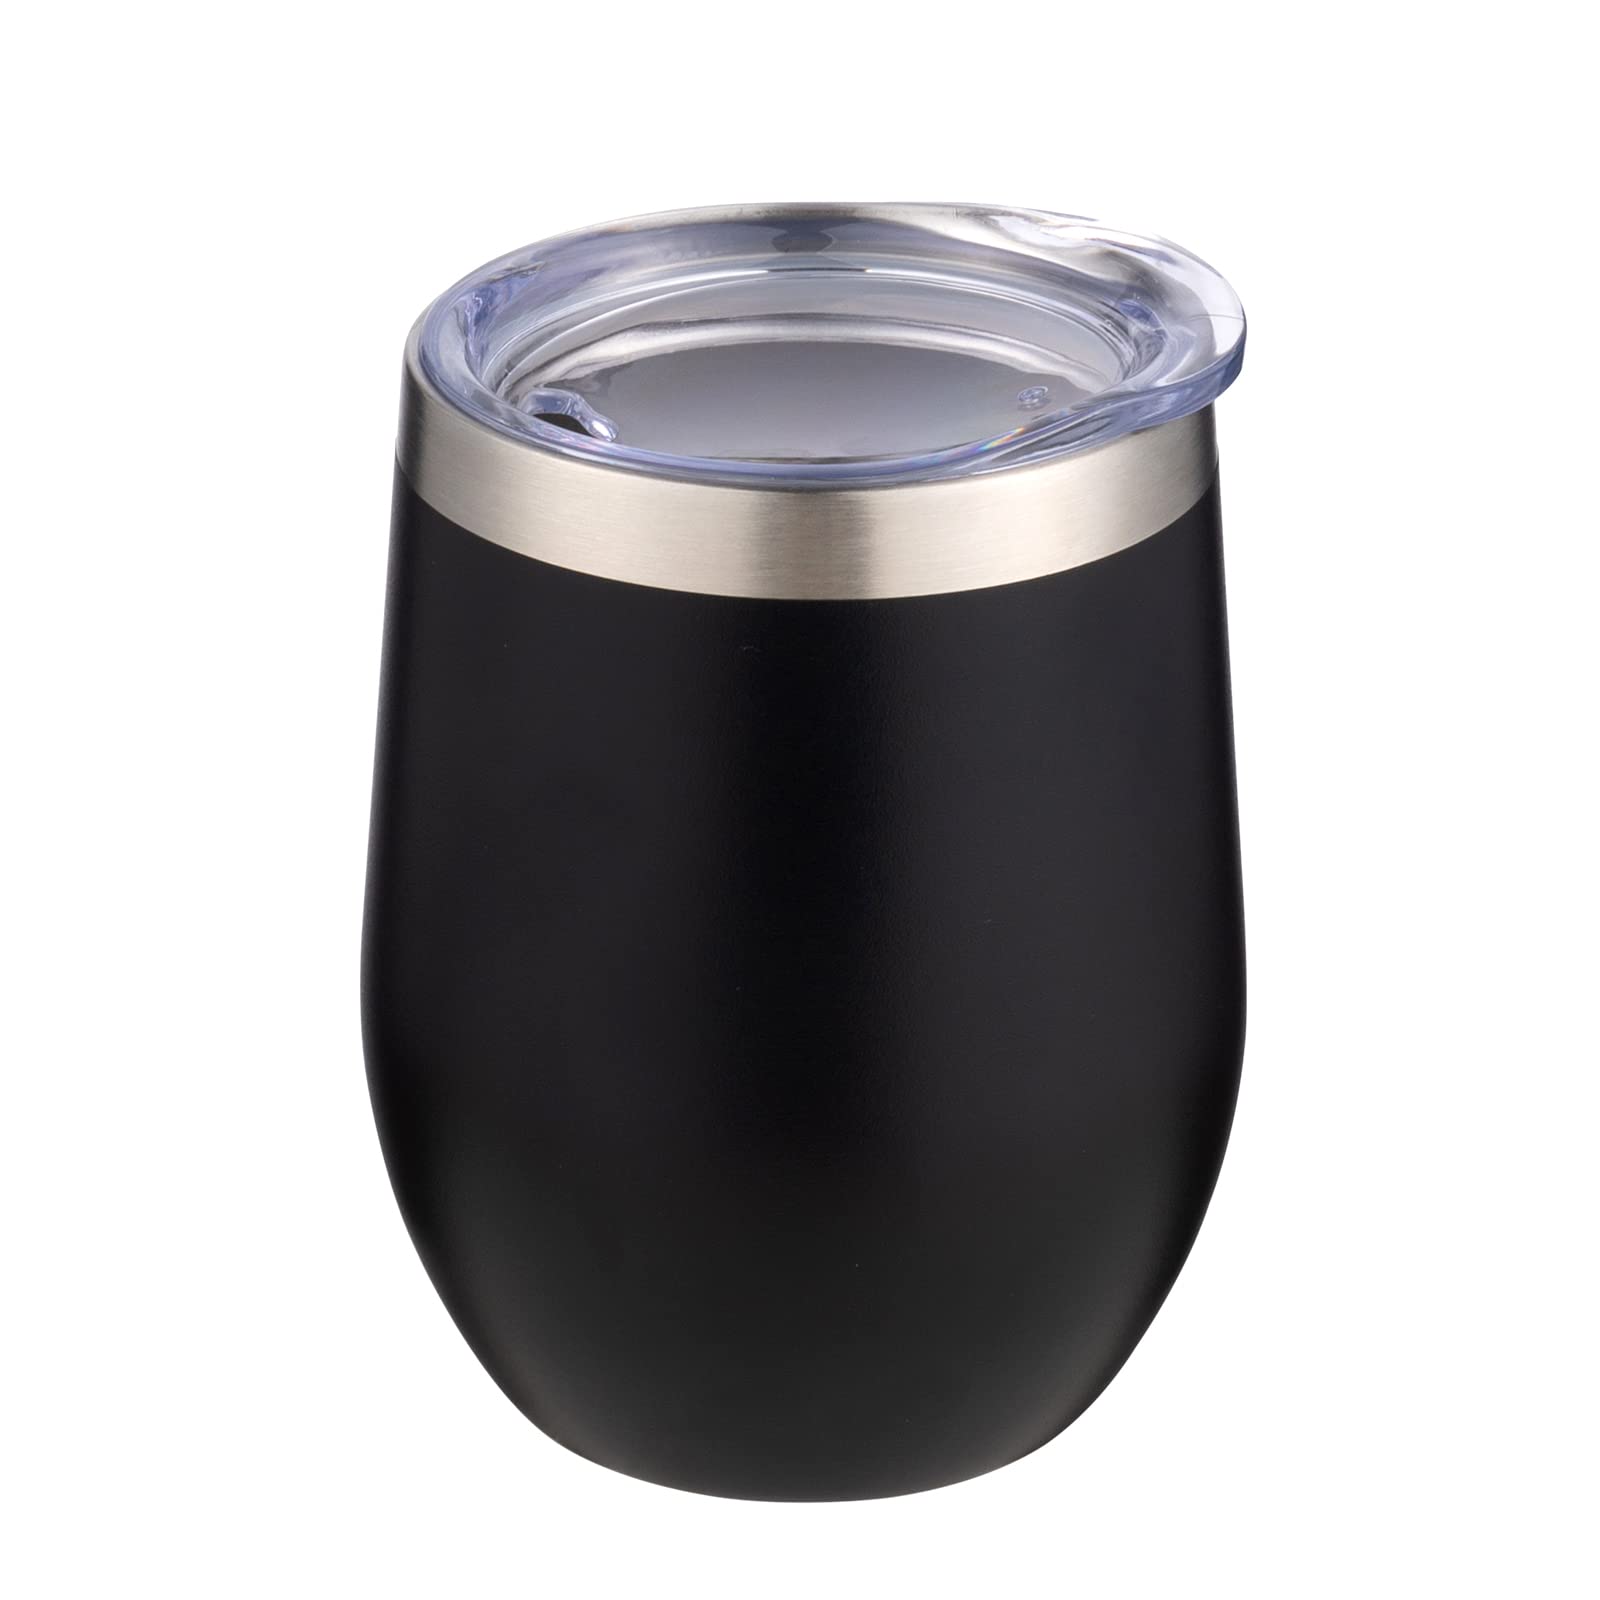 StarSpeed 12OZ Stainless Steel Wine Tumbler with lid. Stemless Double Wall Insulated Wine Tumbler.Wine Glass is suitable for different scenes, parties,outdoor, gifts and so on.(Black, 1)